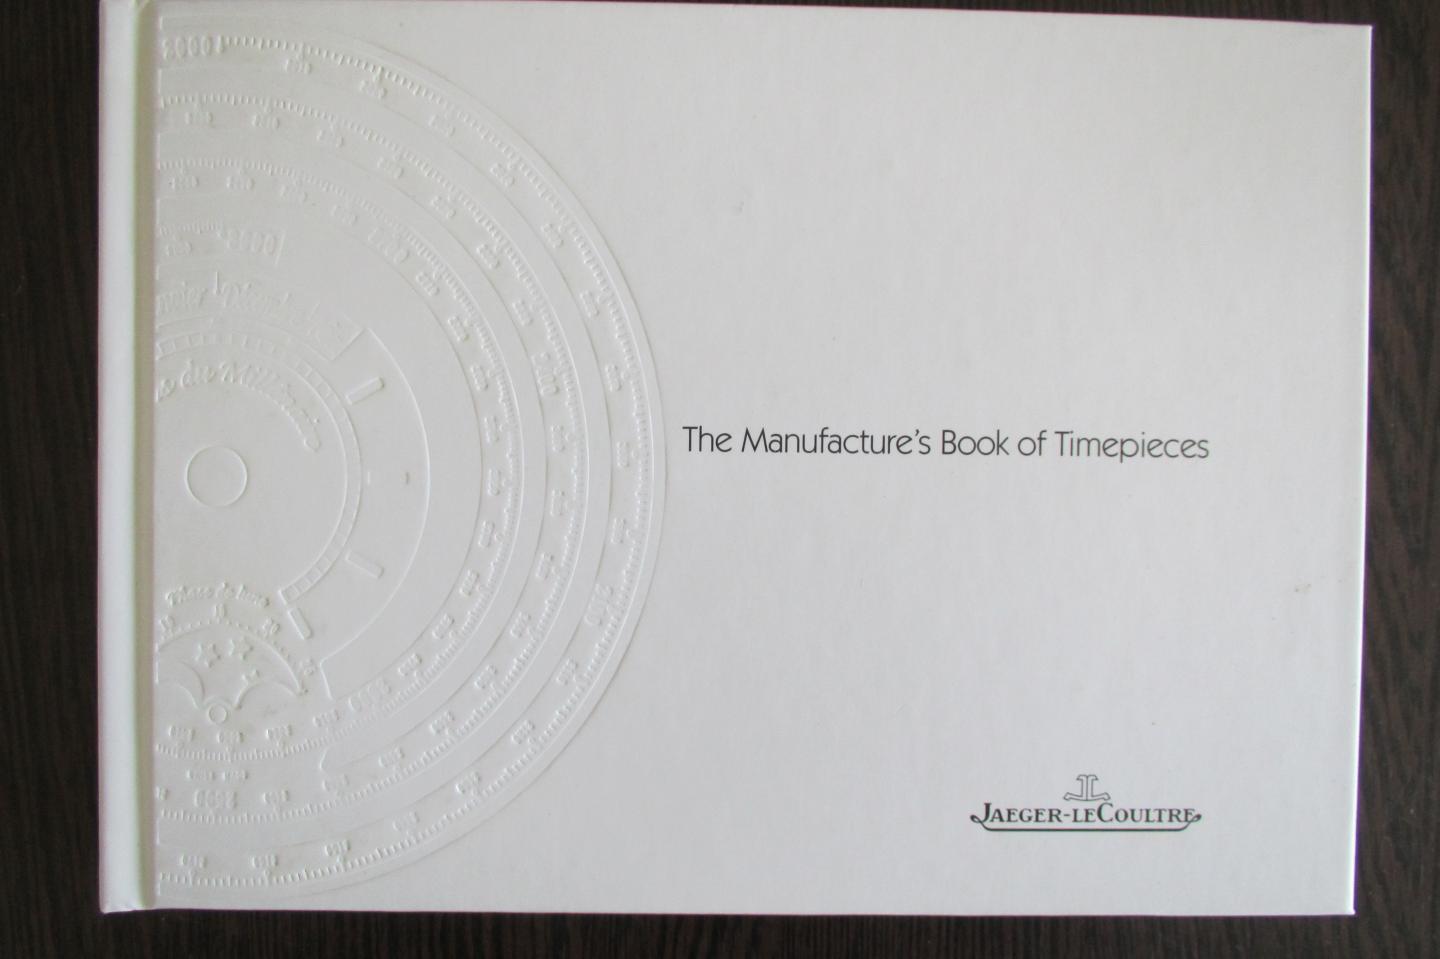 Grey, S.A. - The manufacture's book of timepieces (2000-2001 edition)